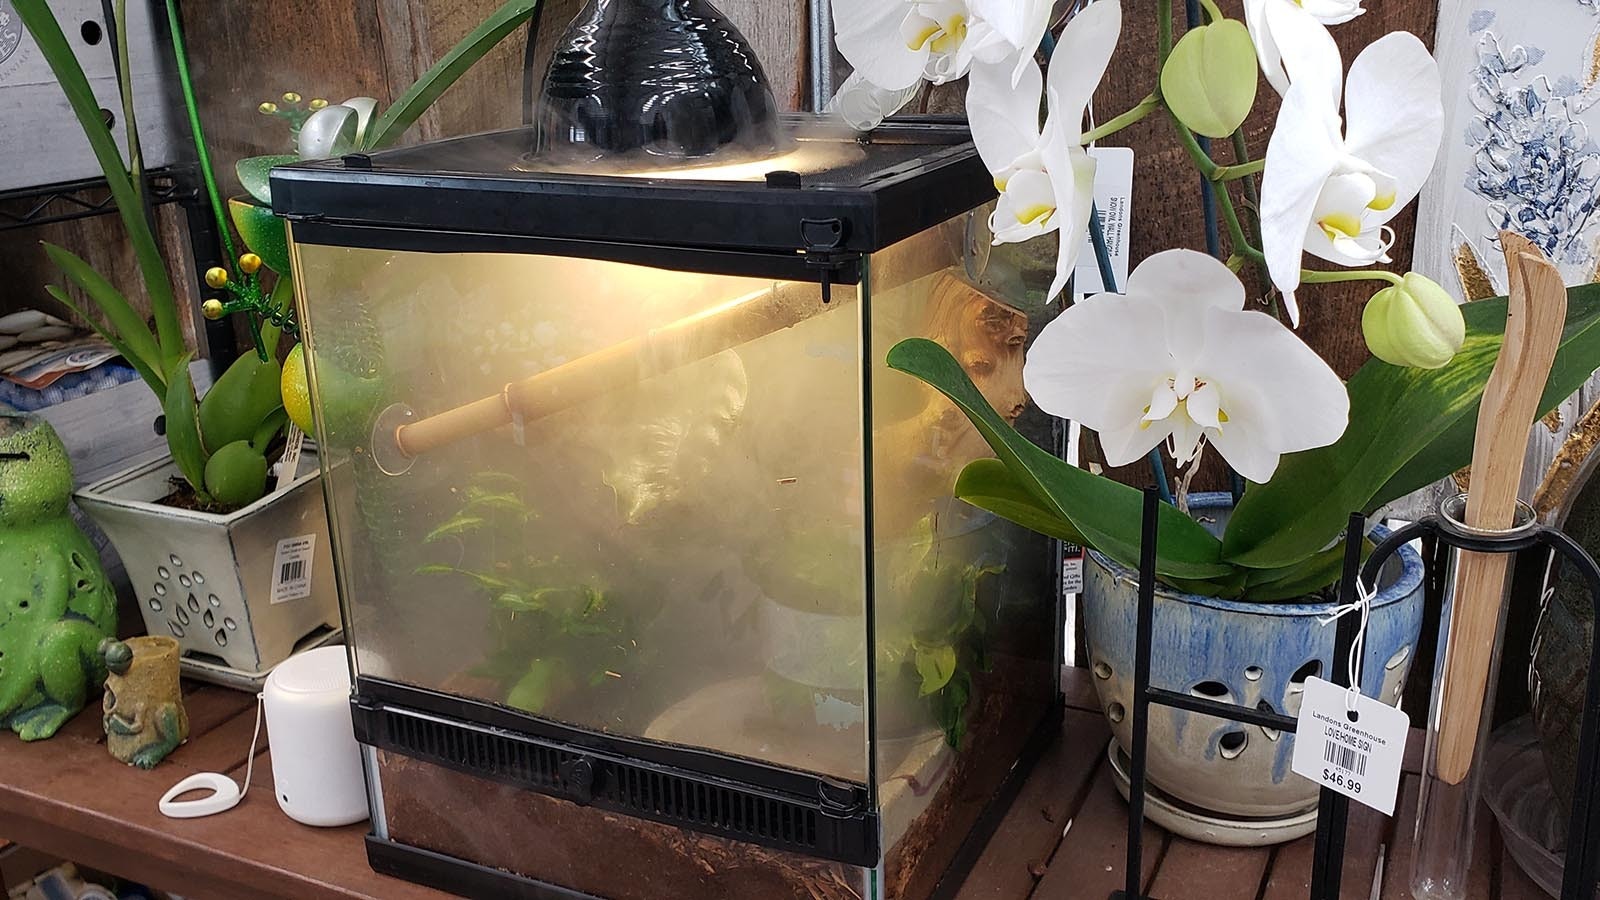 This aquarium is more about the frogs than the plant. The humidity helps ensure the frogs are healthy and happy.